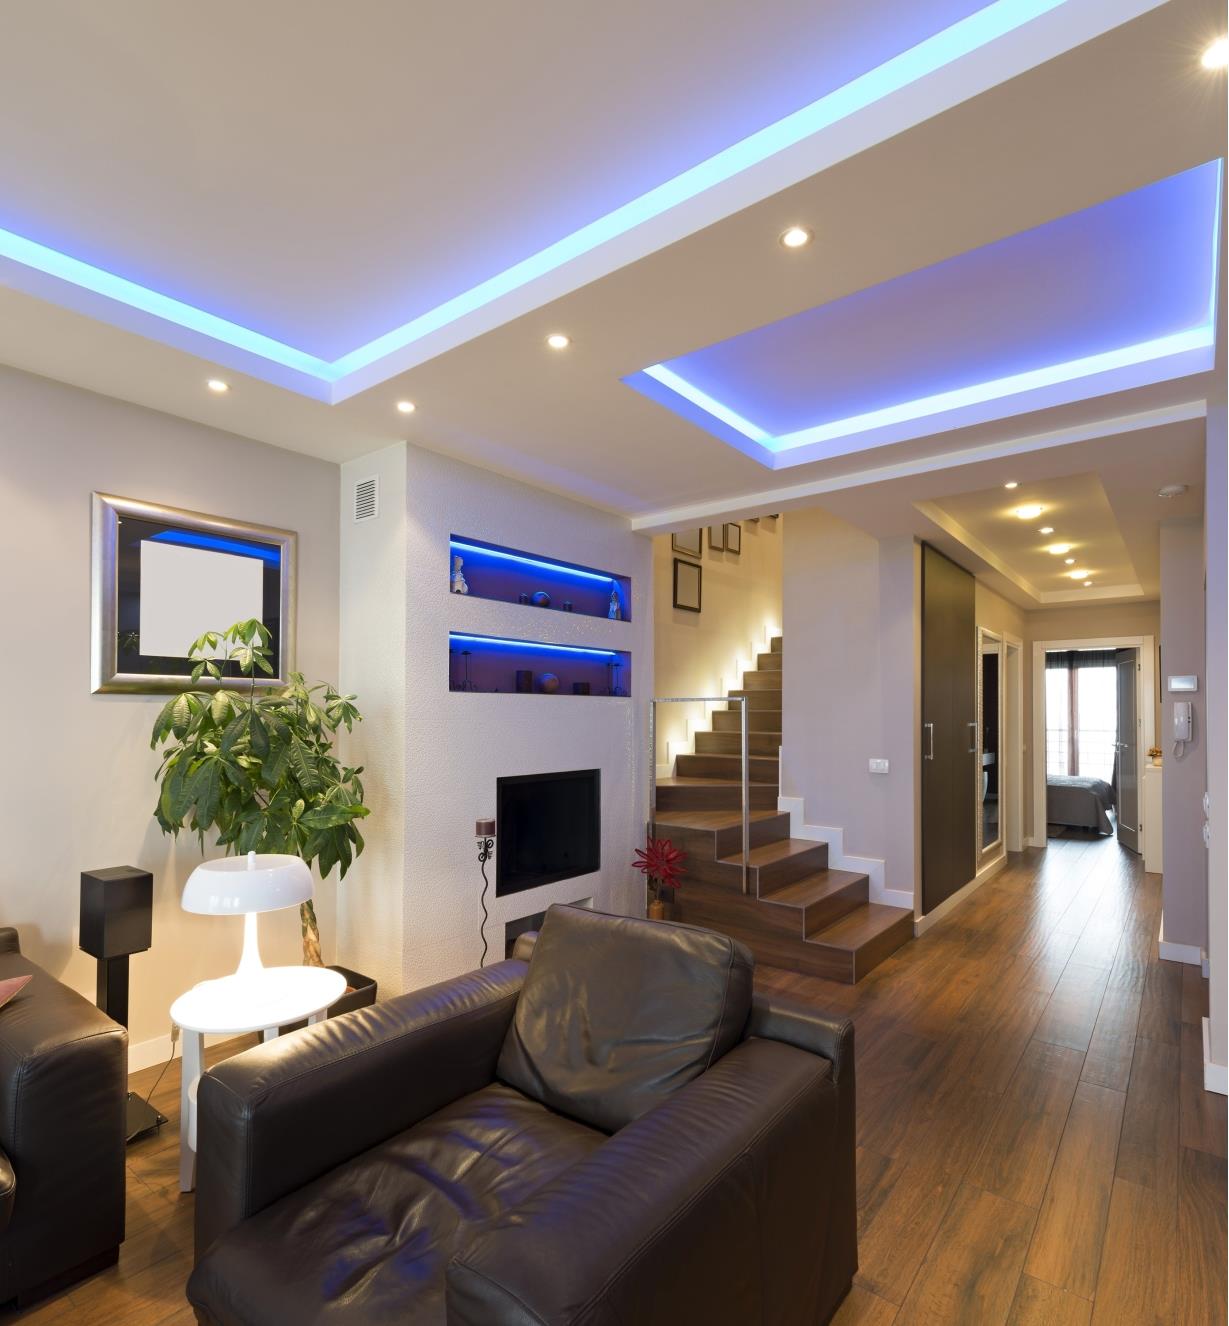 A room and hallway with glowing lights illuminating shelves, recessed ceilings, and a stairway